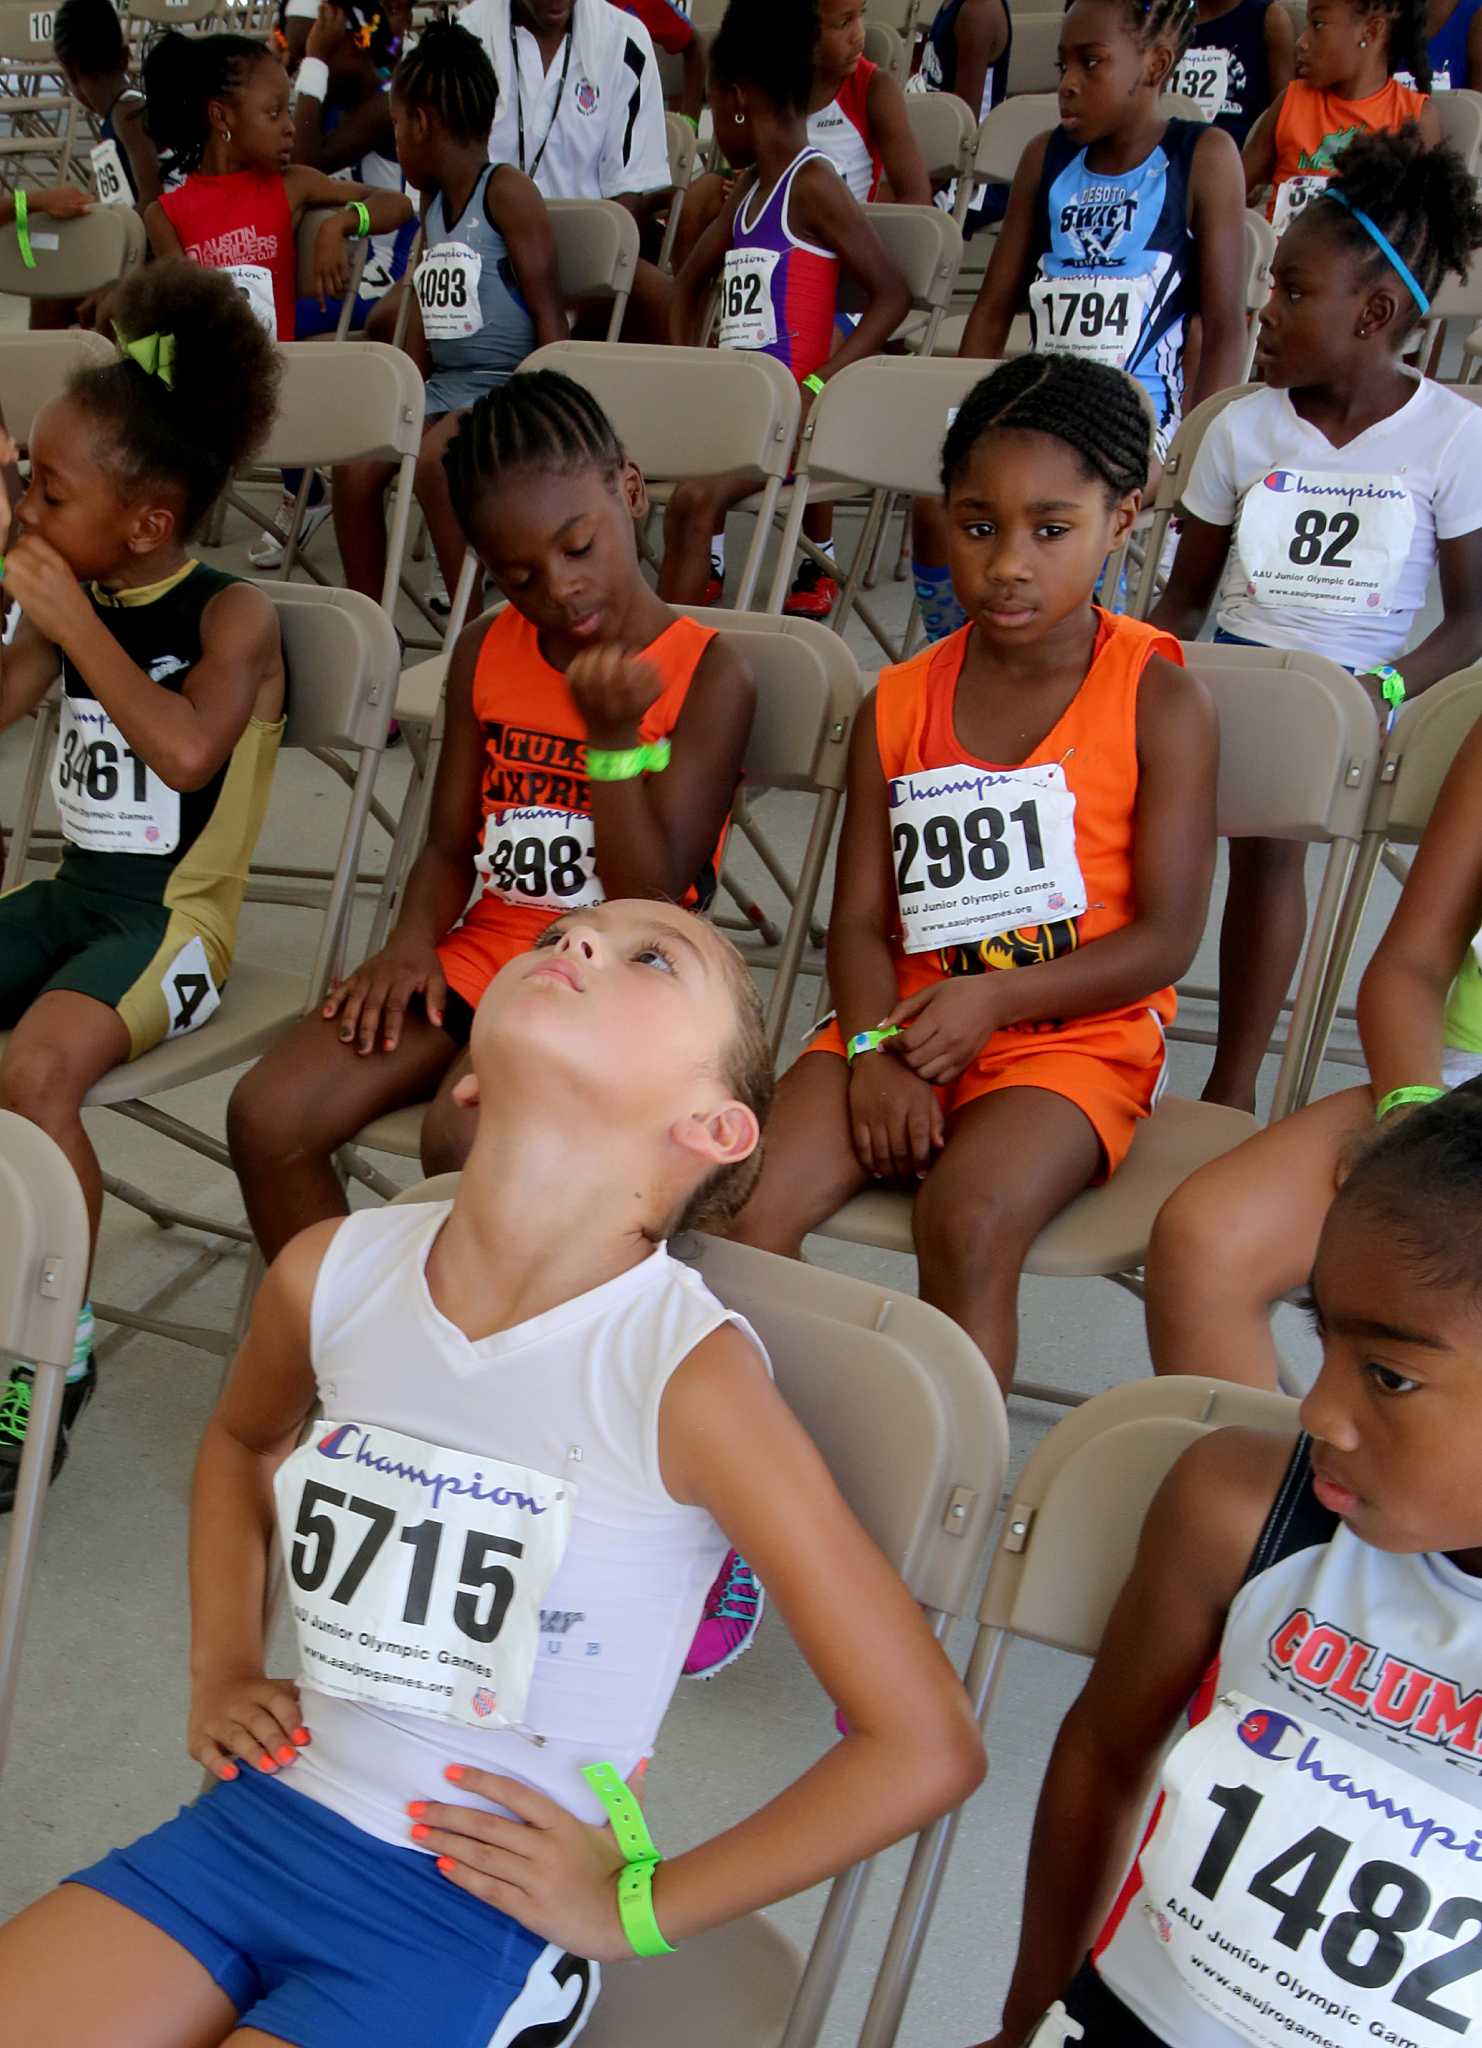 8-year-old track star has Olympic dreams